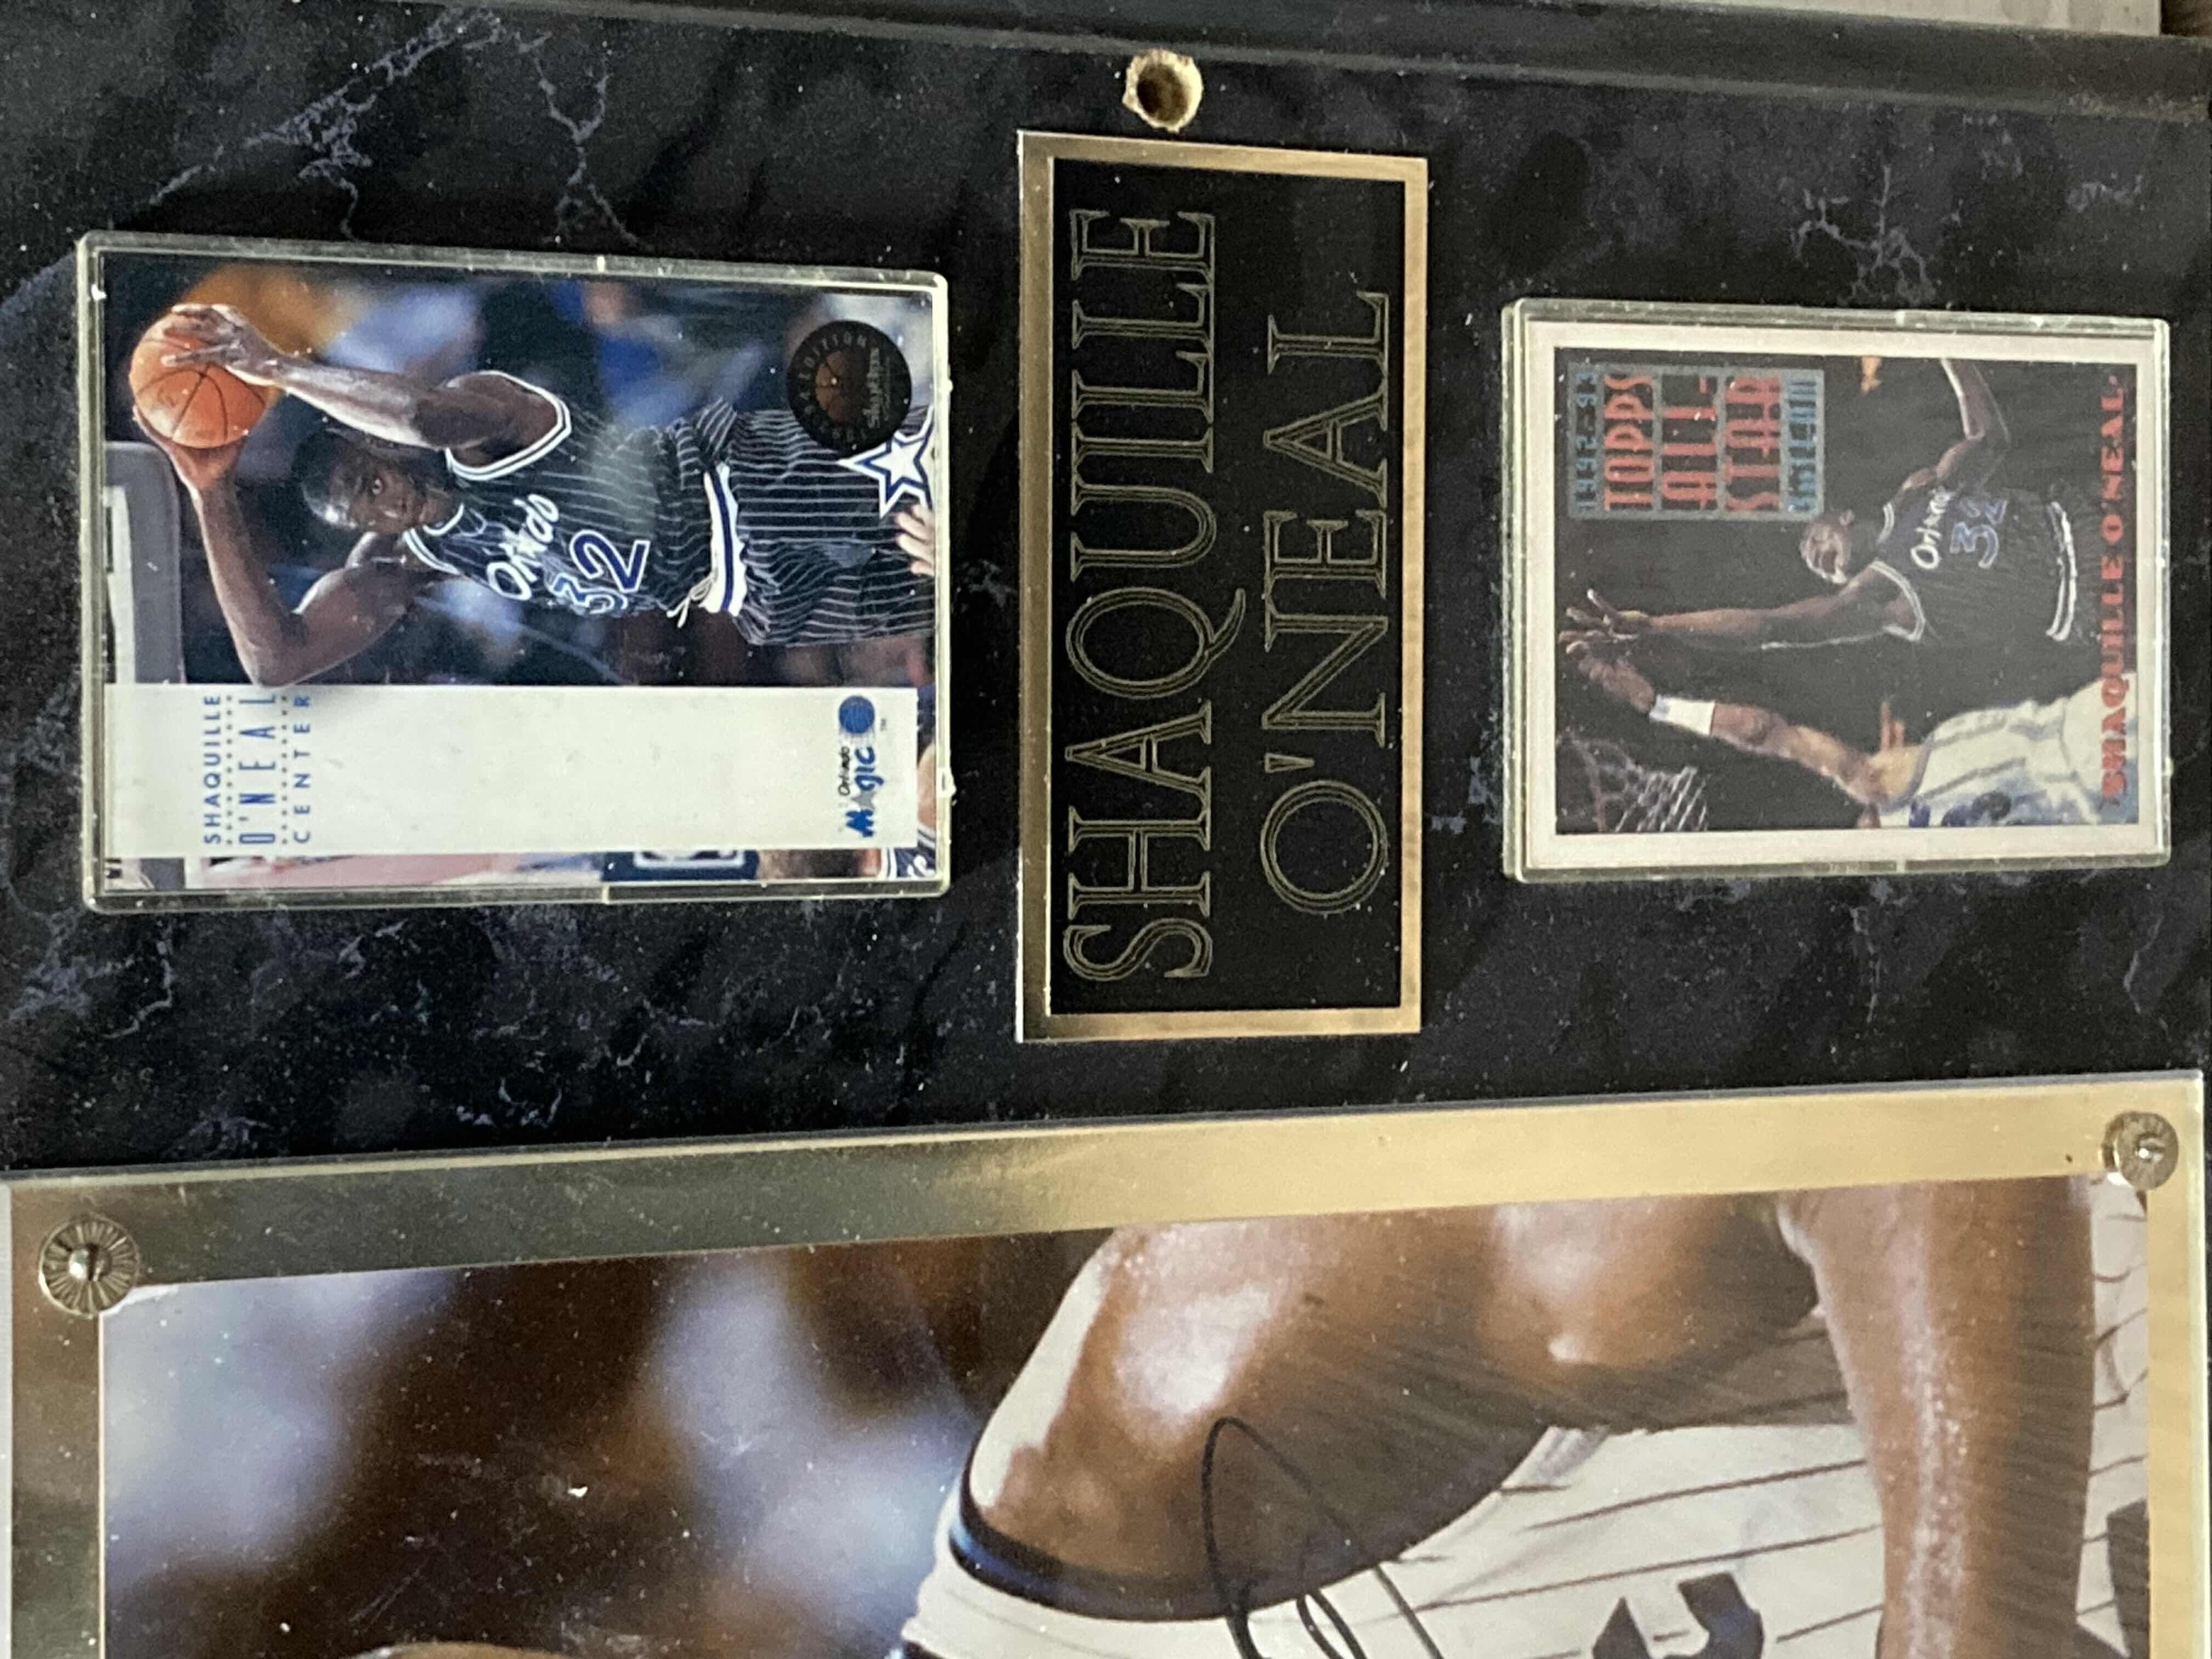 Photo 4 of SHAQUILLE O’NEAL MAGIC #32 MEMORABILIA PLAQUE AUTOGRAPHED BY SHAQUILLE O’NEAL W PLAYERS CARDS & COA 15” X 12”